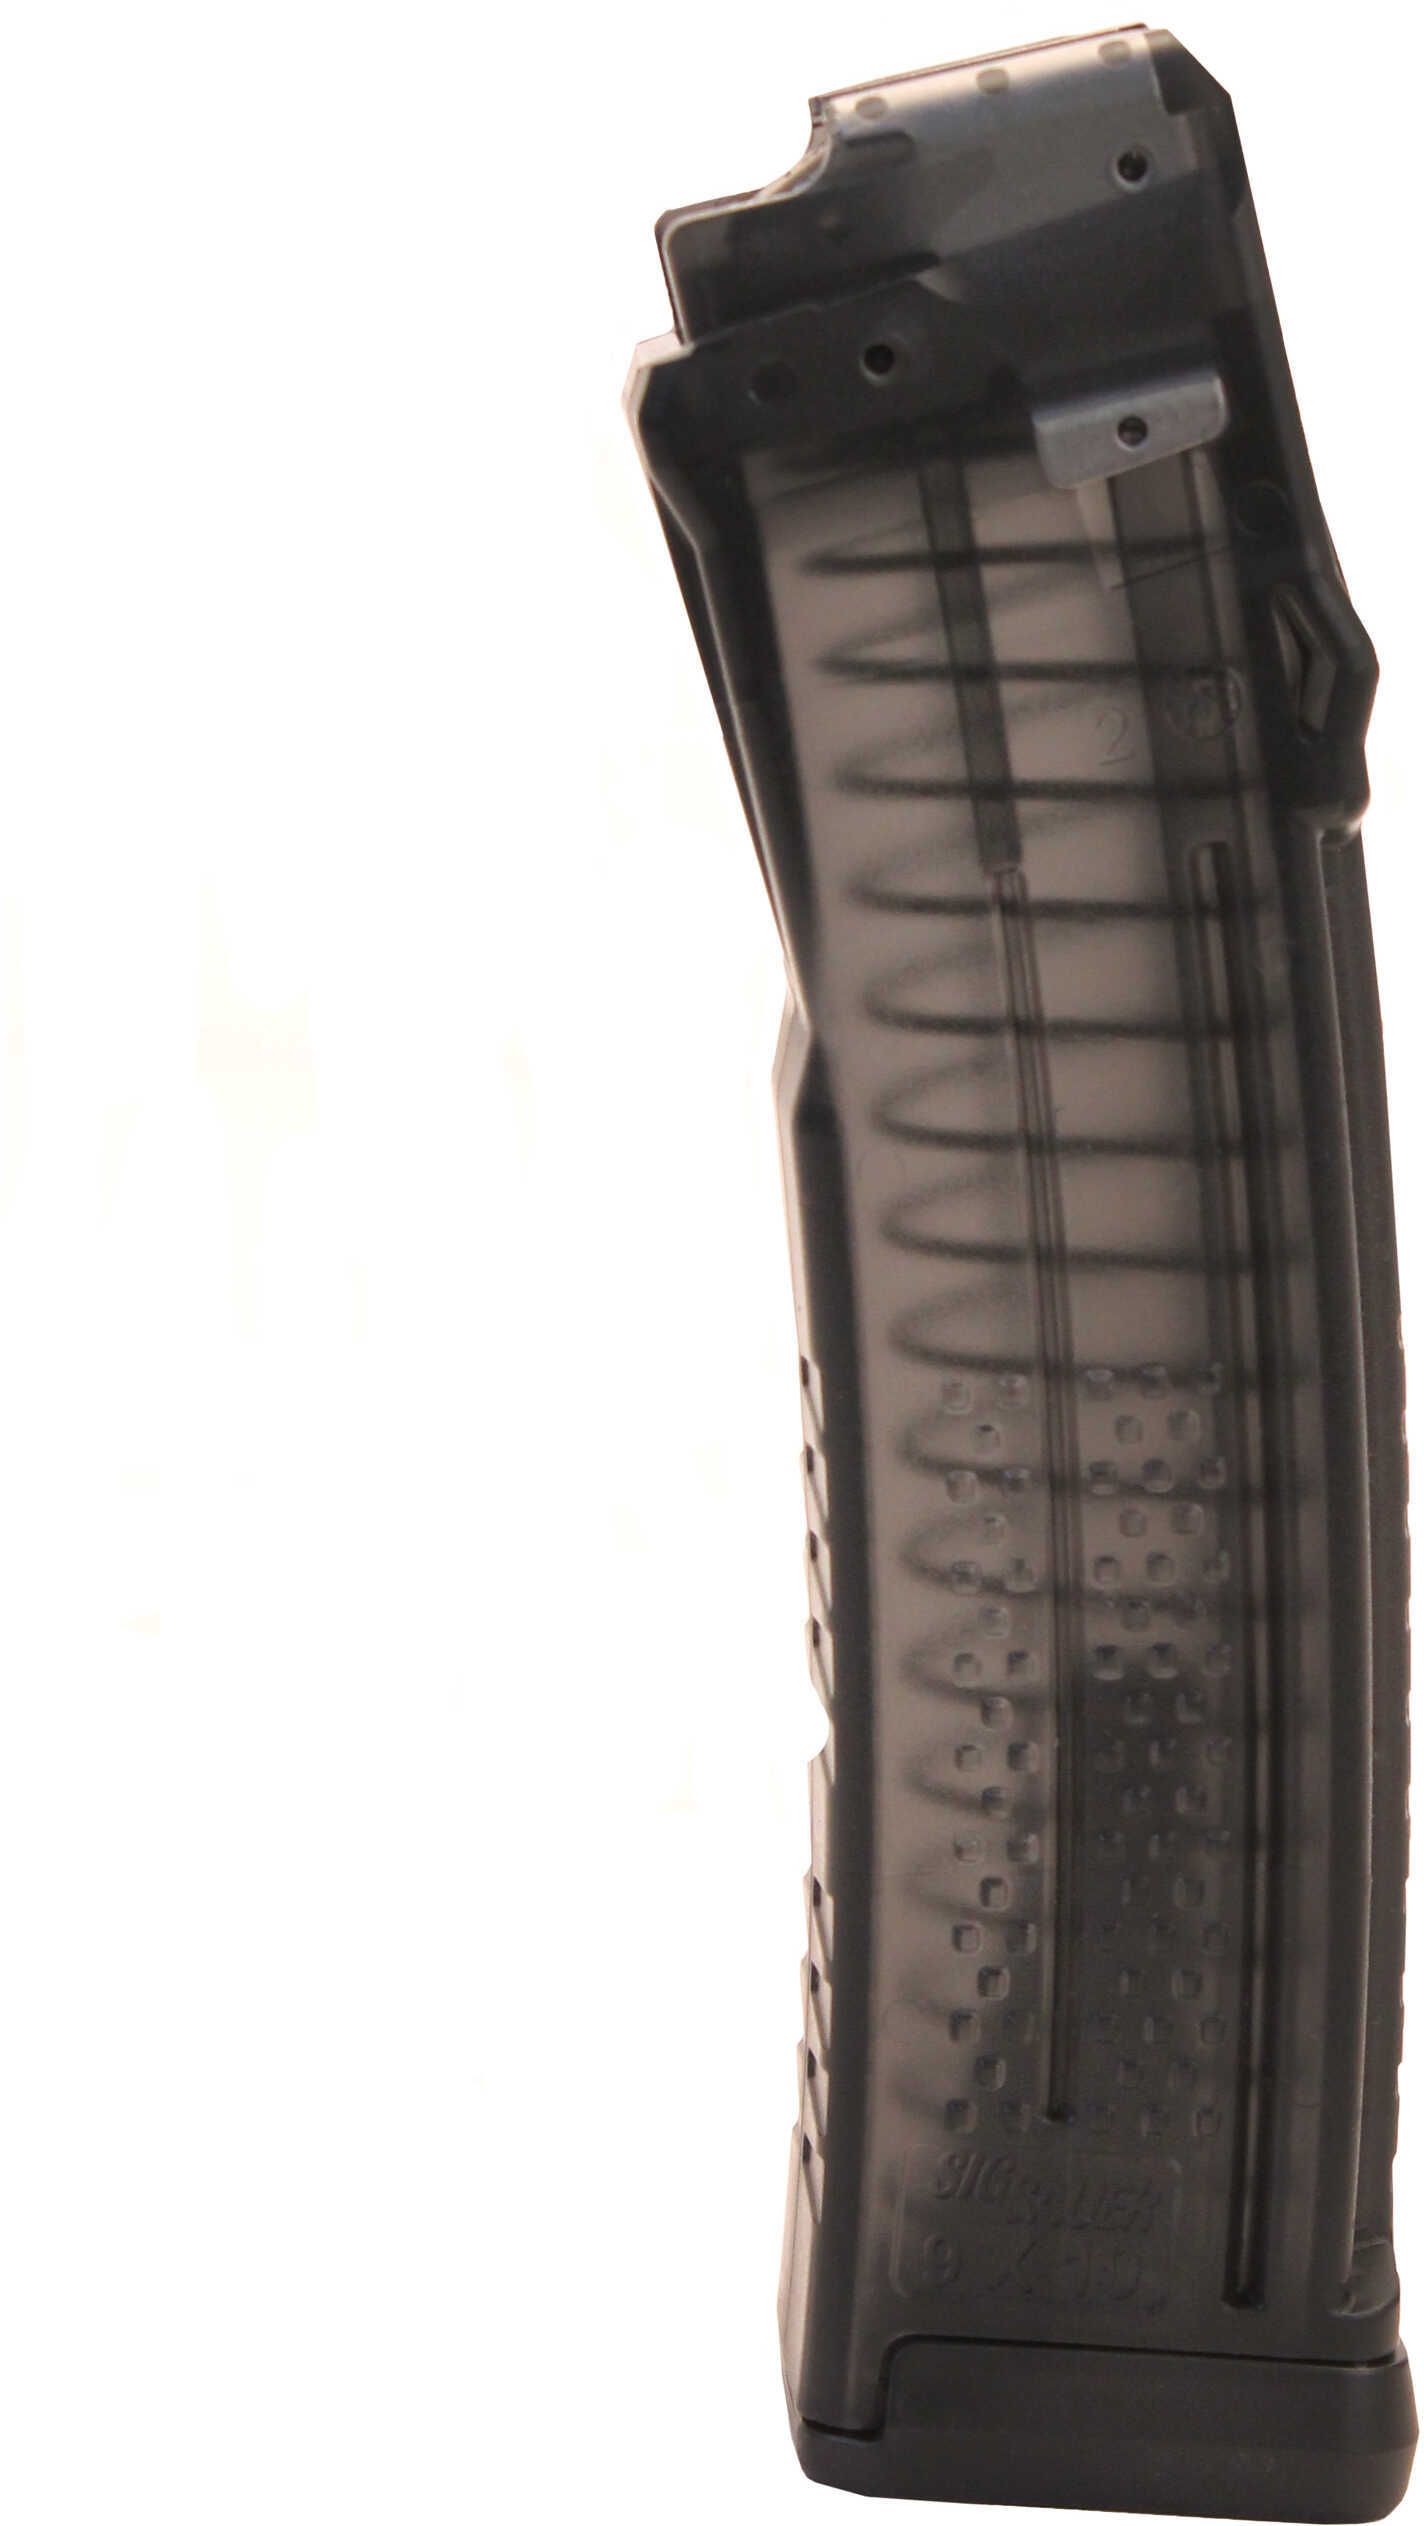 SigTac MPX Magazine Gen II, 9mm, 20 Rounds Md: MAG-MPX-9-20-KM